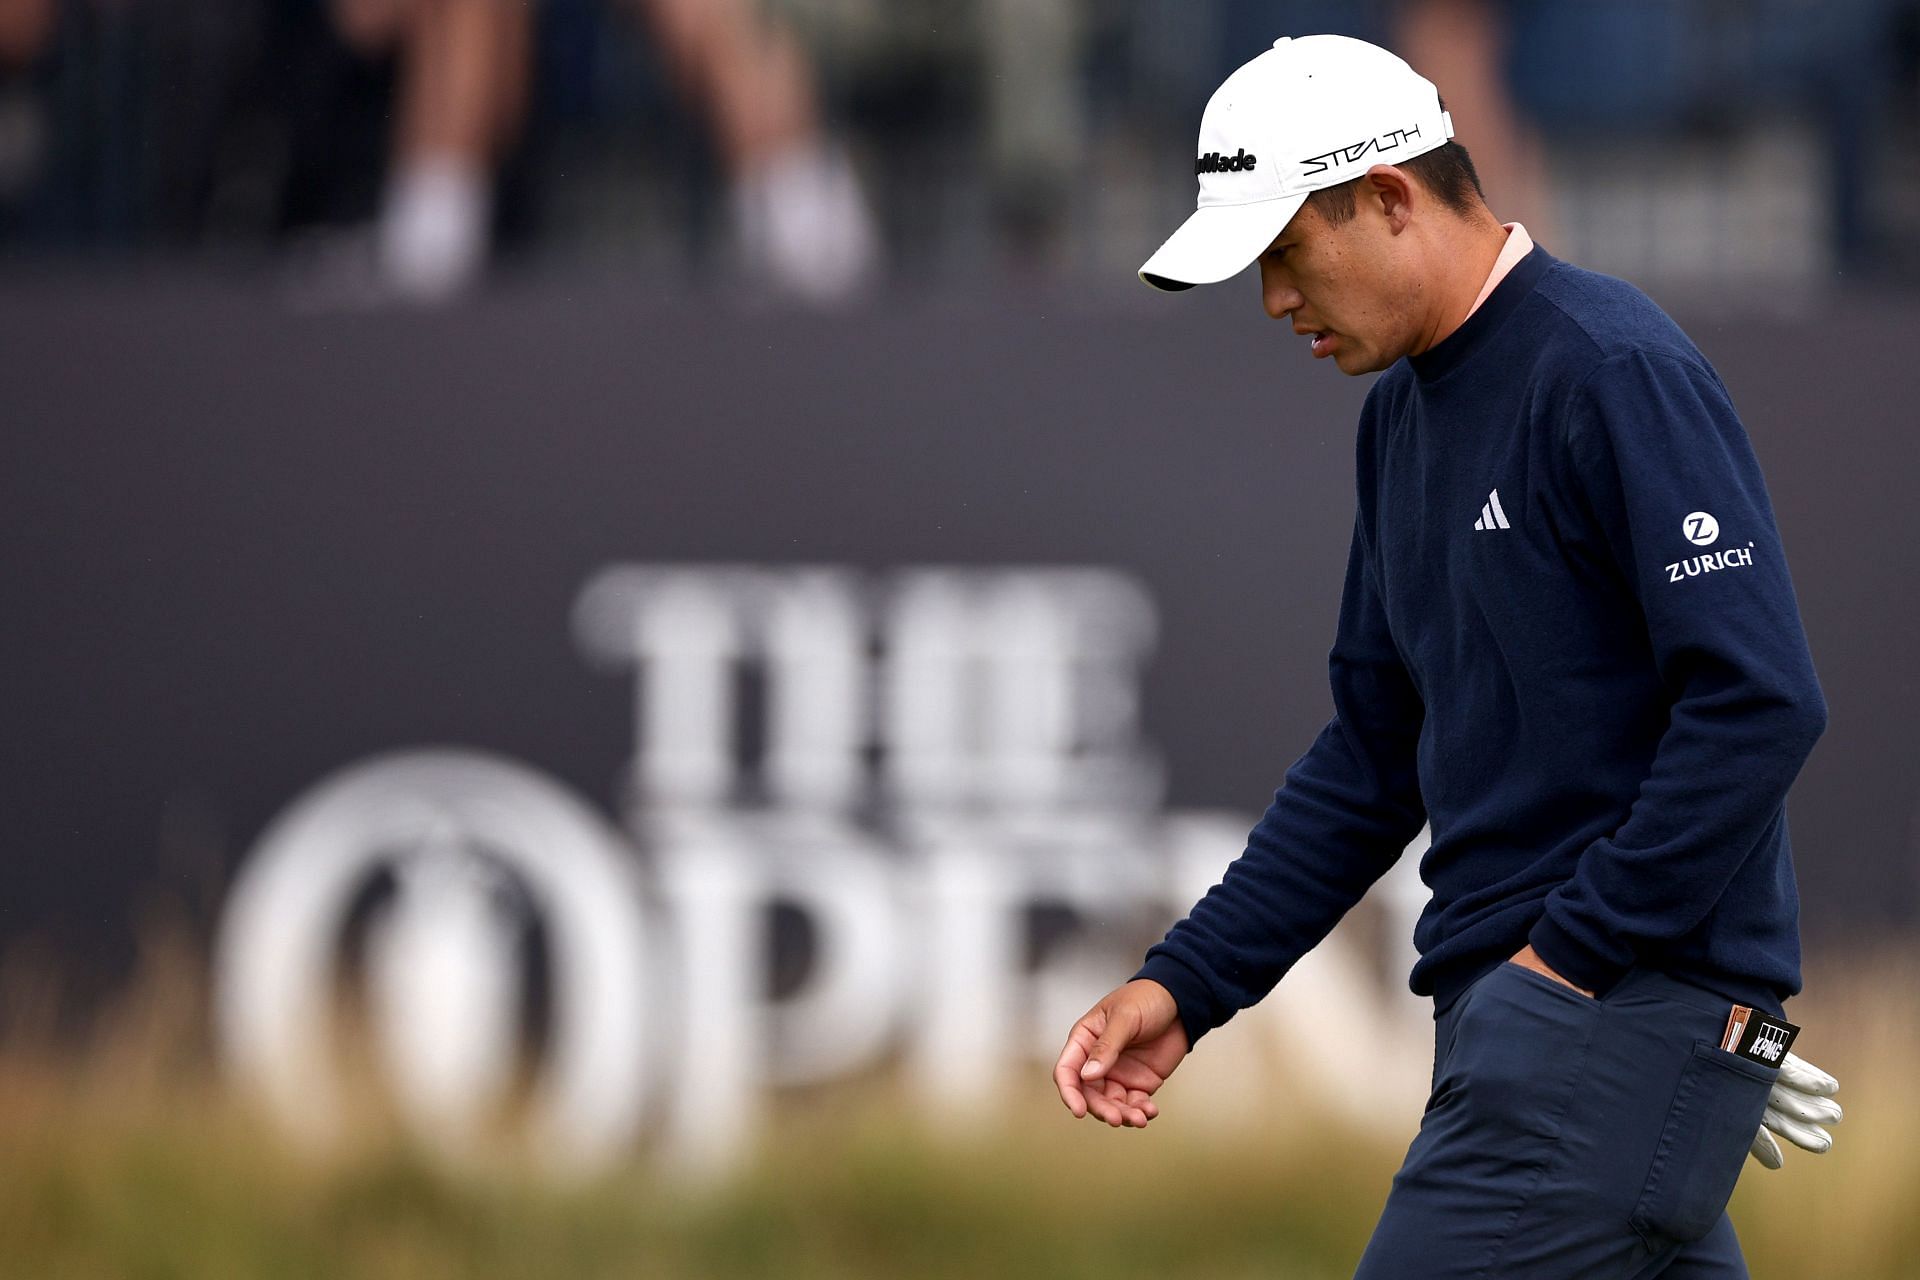 Colline Morikawa failed to make it to the weekend of the 151st Open